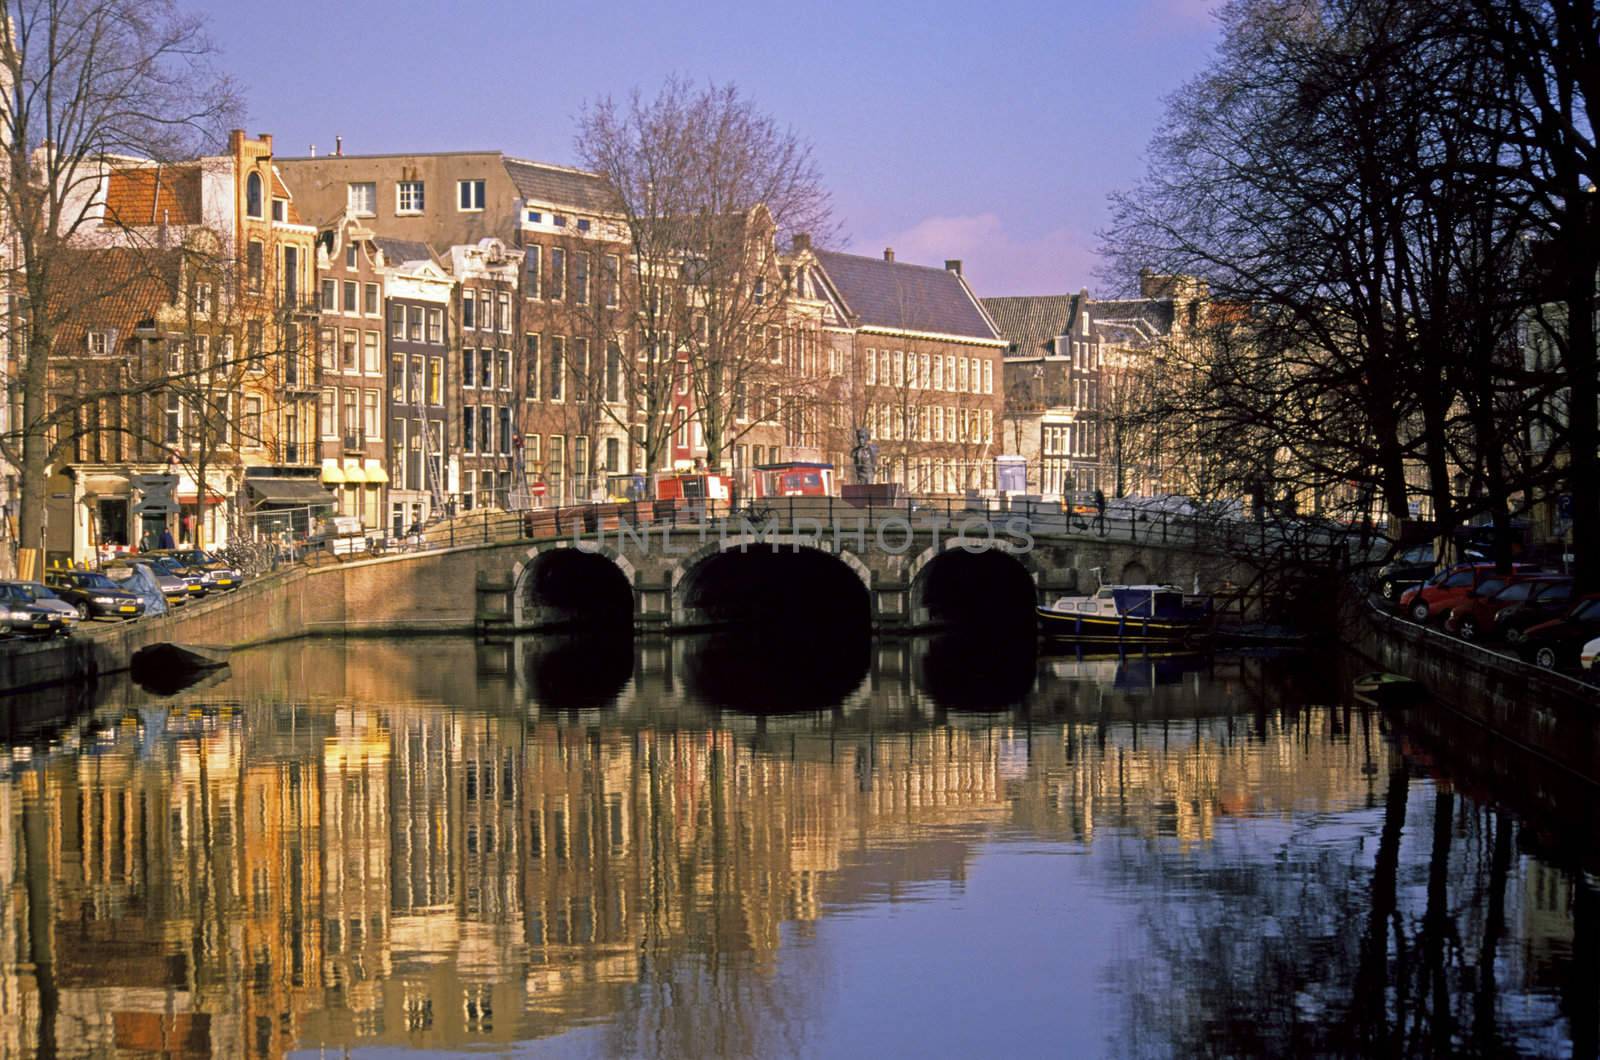 Traditional canal houses line a canal spanned by a scenic bridge in Amsterdam, the Netherlands.